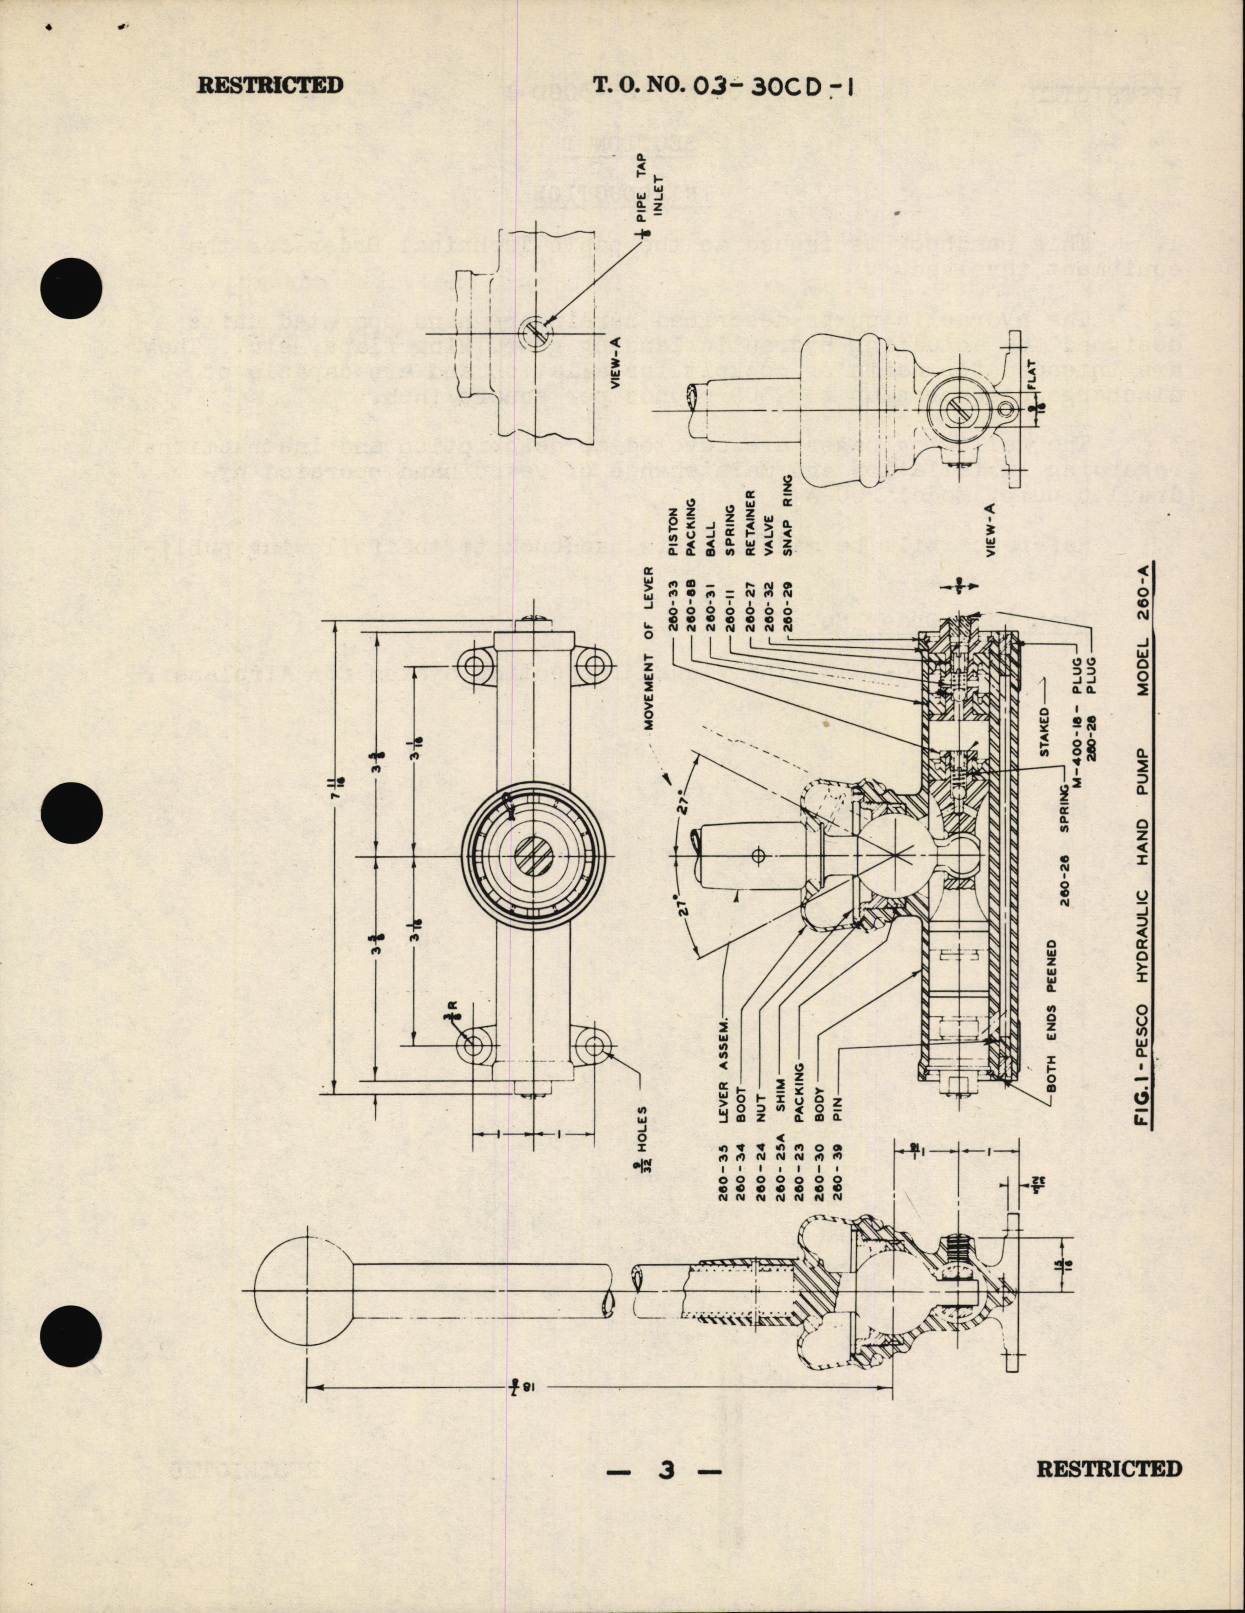 Sample page 5 from AirCorps Library document: Handbook of Instruction with Parts Catalog for Hand Operated Hydraulic Pumps